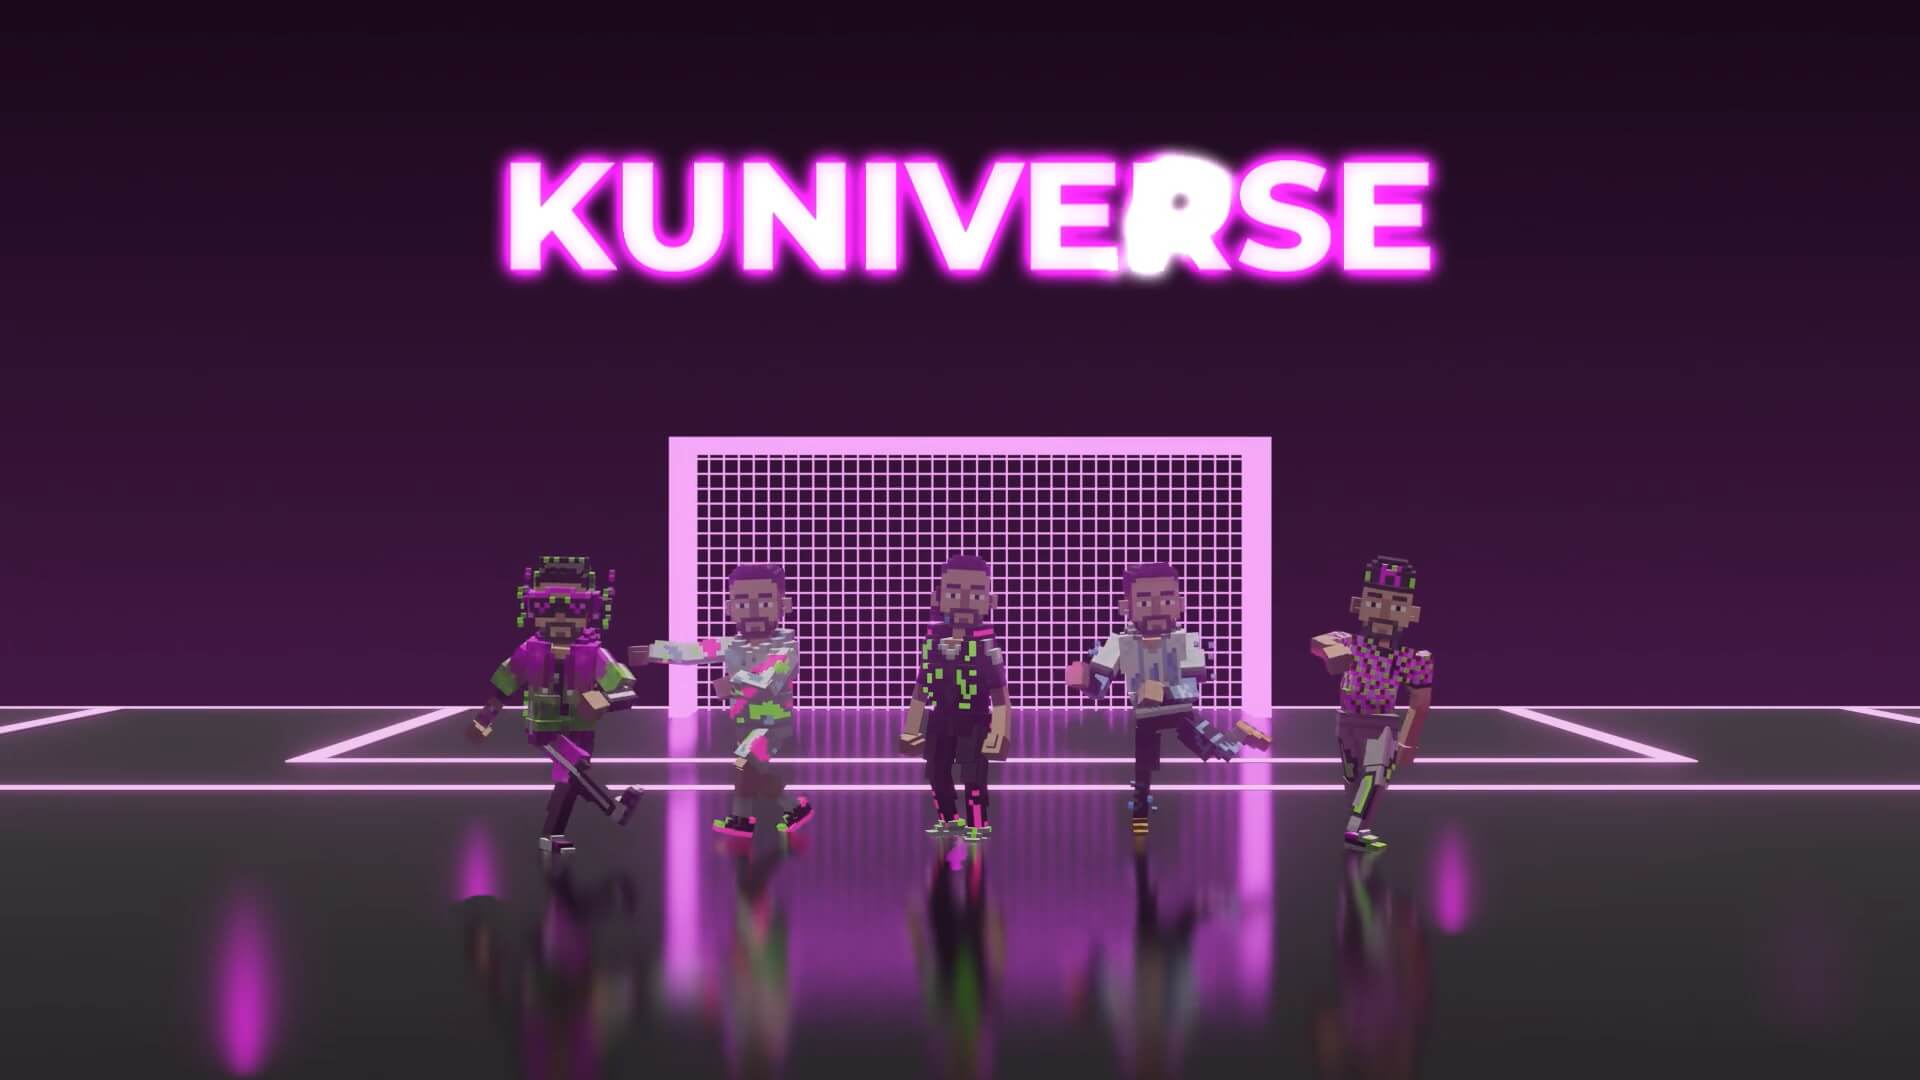 The Kuniverse Sandbox Event is live with a 500,000 SAND Prize Pool